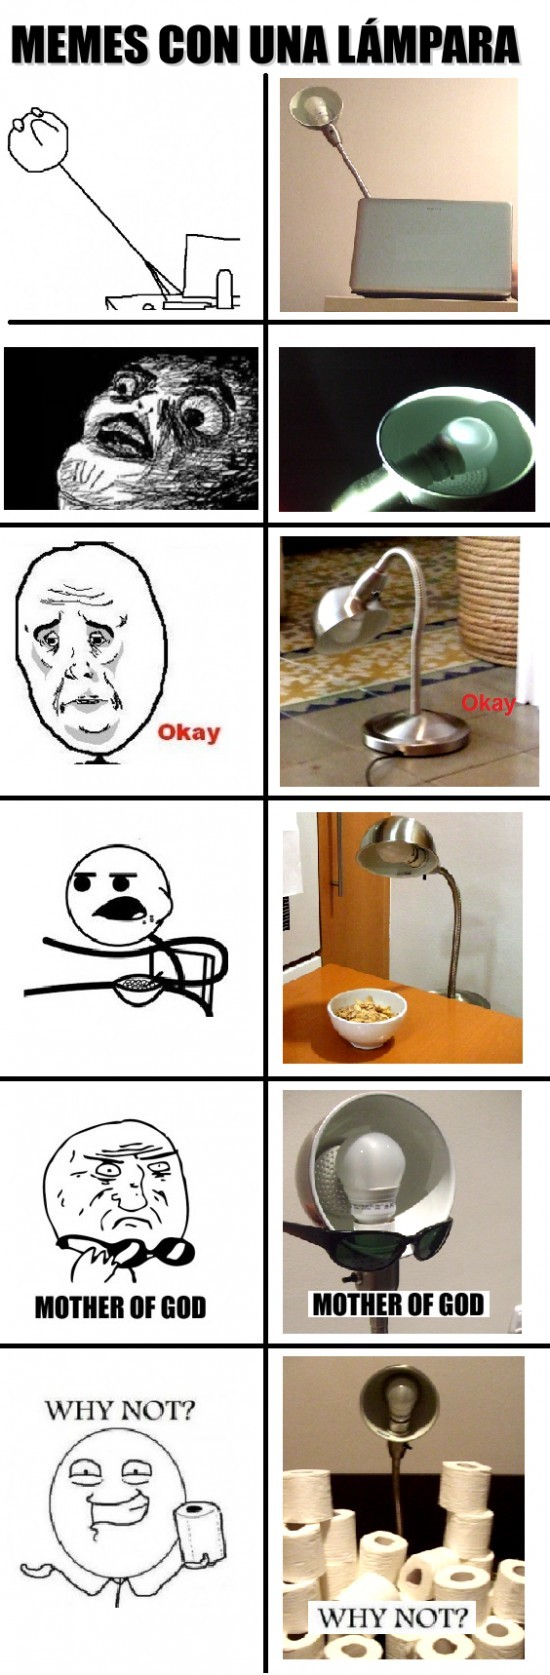 cereal guy,lampara,mix,mother of god,okay,why not